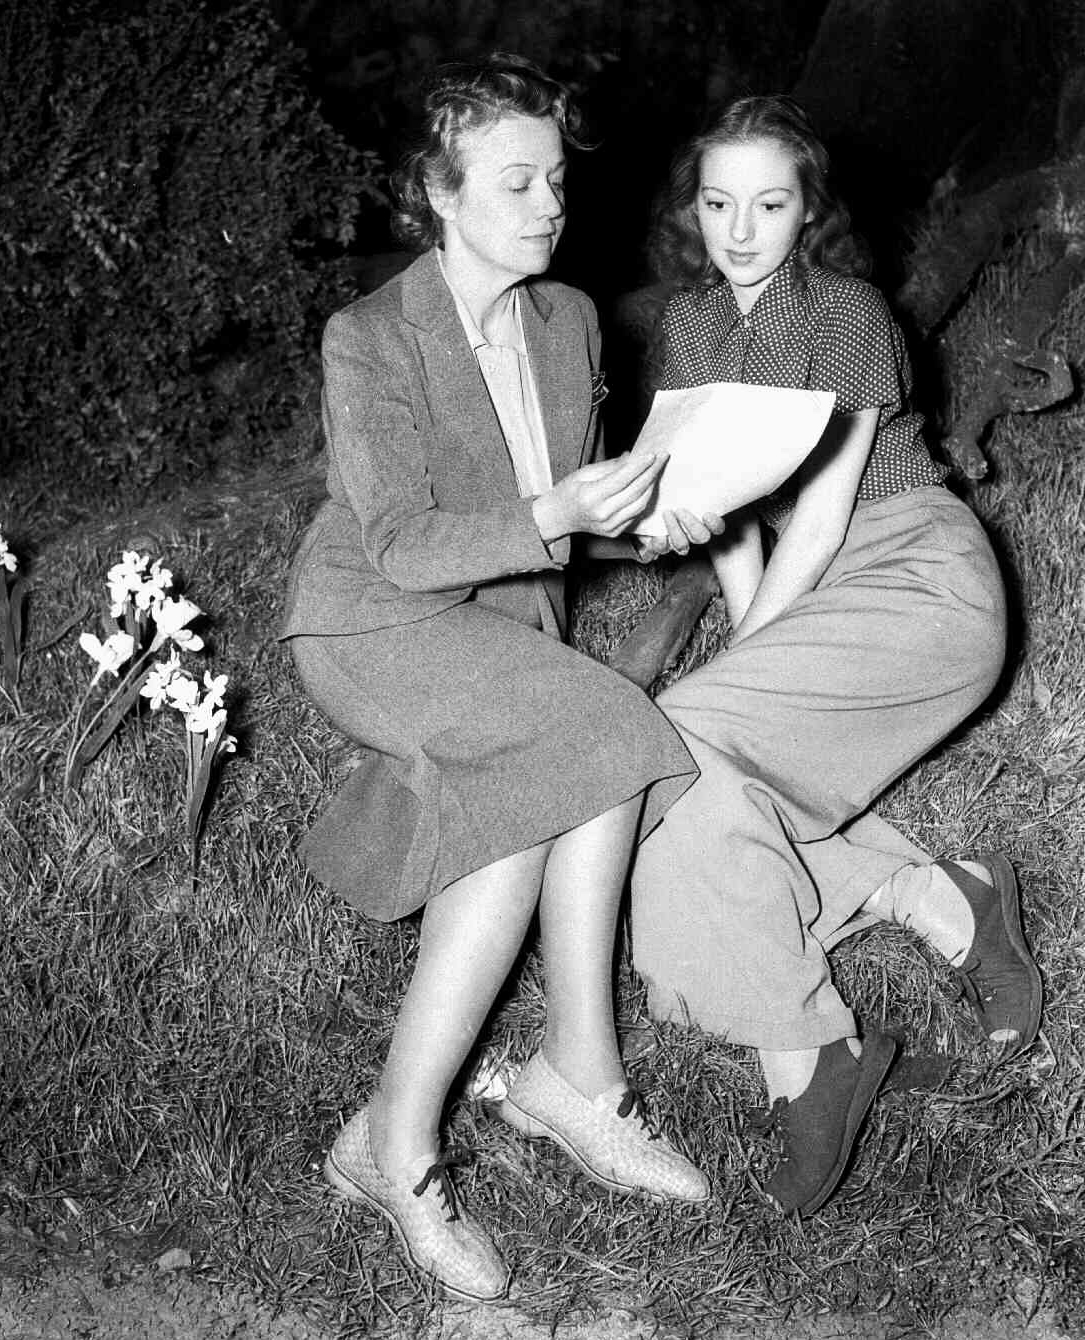 Technical Advisor Susan Myrick and Evelyn Keyes, Suellen O'Hara, on the set of Gone with the Wind in 1939.